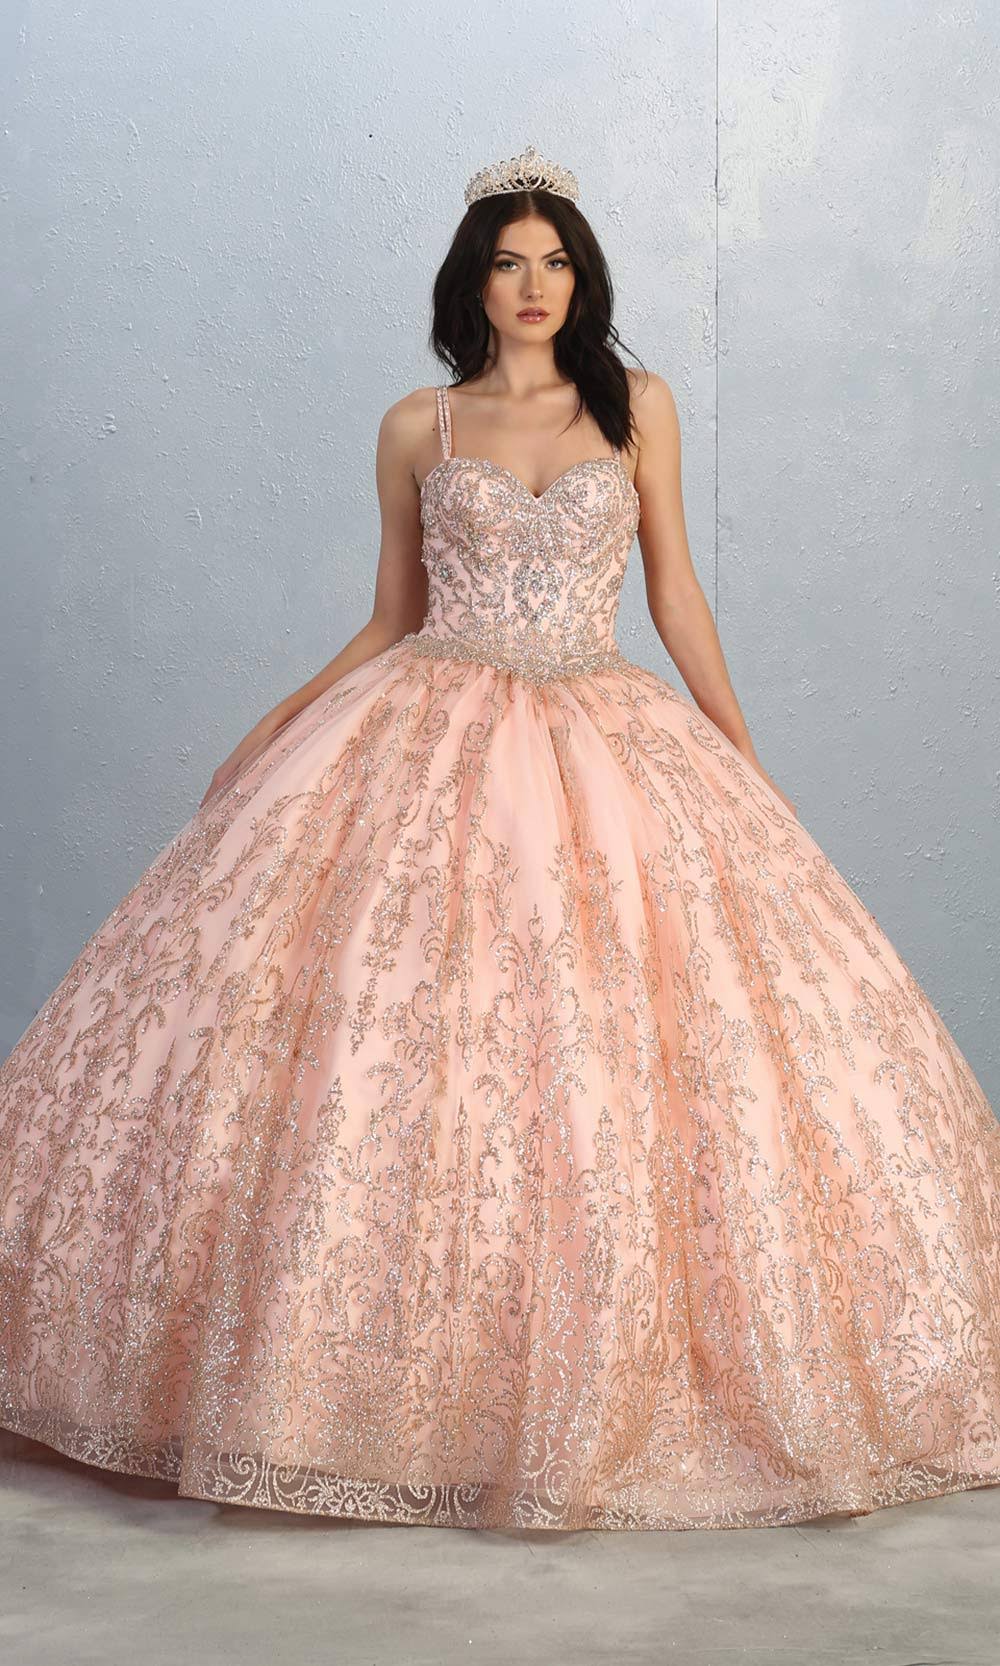 Mayqueen LK145 blush pink quinceanera ball gown w/glittery skirt & beaded top.This light pink ball gown is perfect for engagement dress, wedding reception, indowestern party gown, sweet 16, debut, sweet 15, sweet 18. Plus sizes available for ballgowns